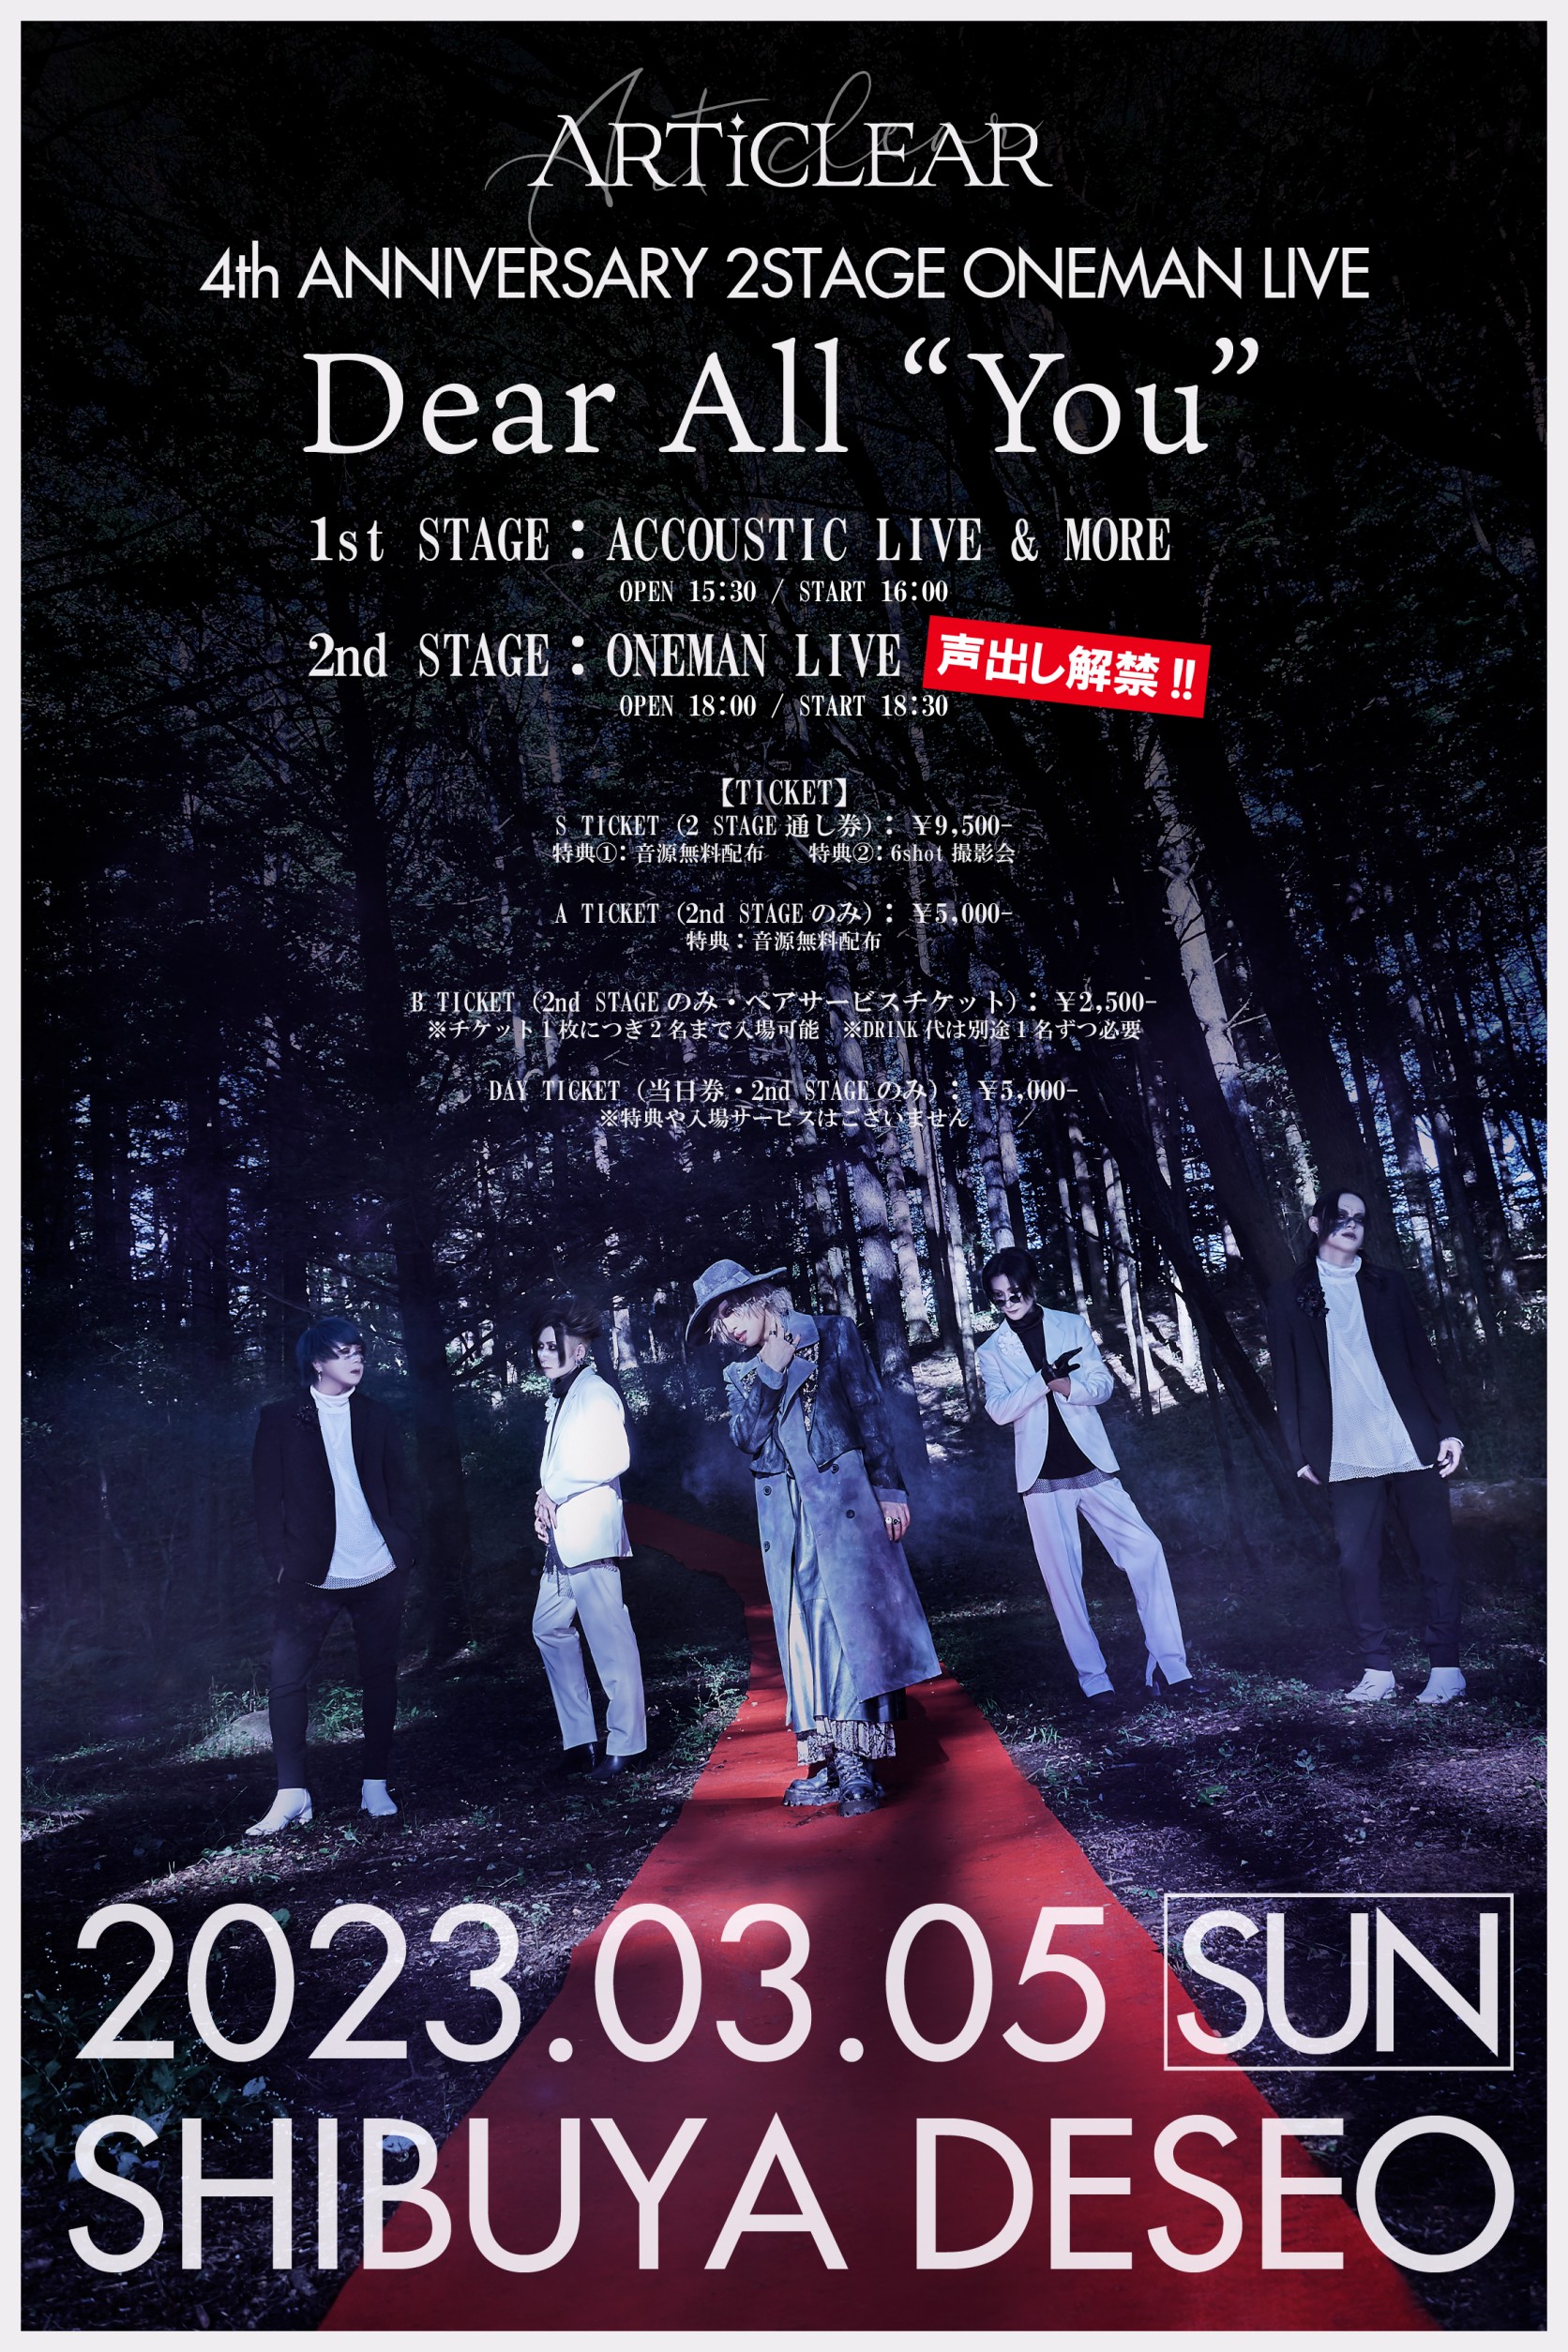 ARTiCLEAR 4th ANNIVERSARY 2STAGE ONEMAN LIVE Dear All “You” S TICKET※(2 STAGE通し券）